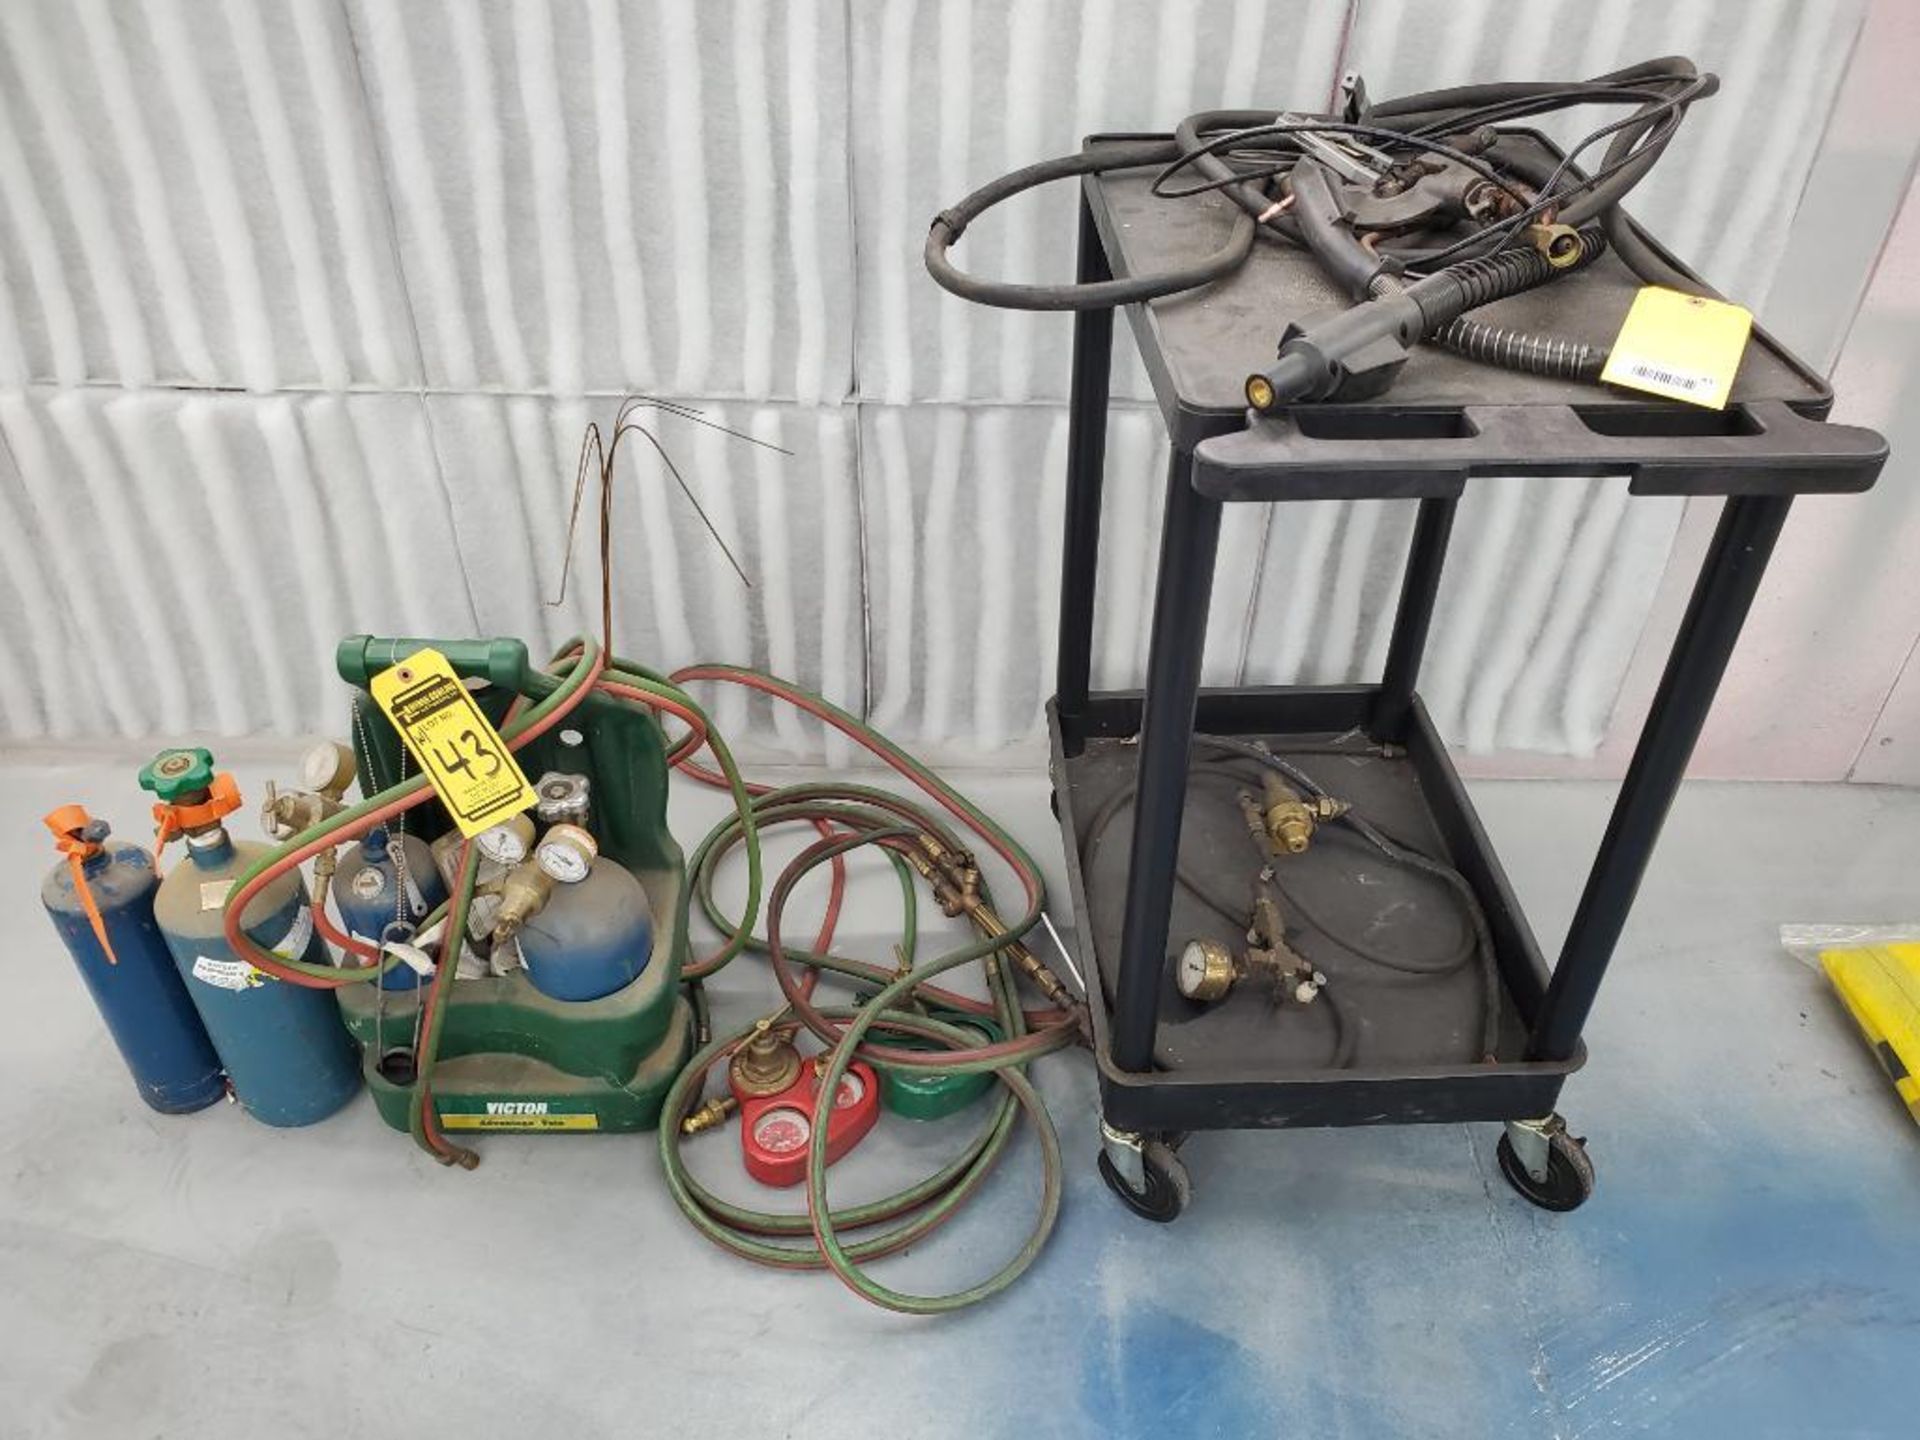 Victor Portable Oxy/Acetylene Welding/Cutting Outfit, Torch Head w/ Hose & Gauges, Cart w/ Wire Gun